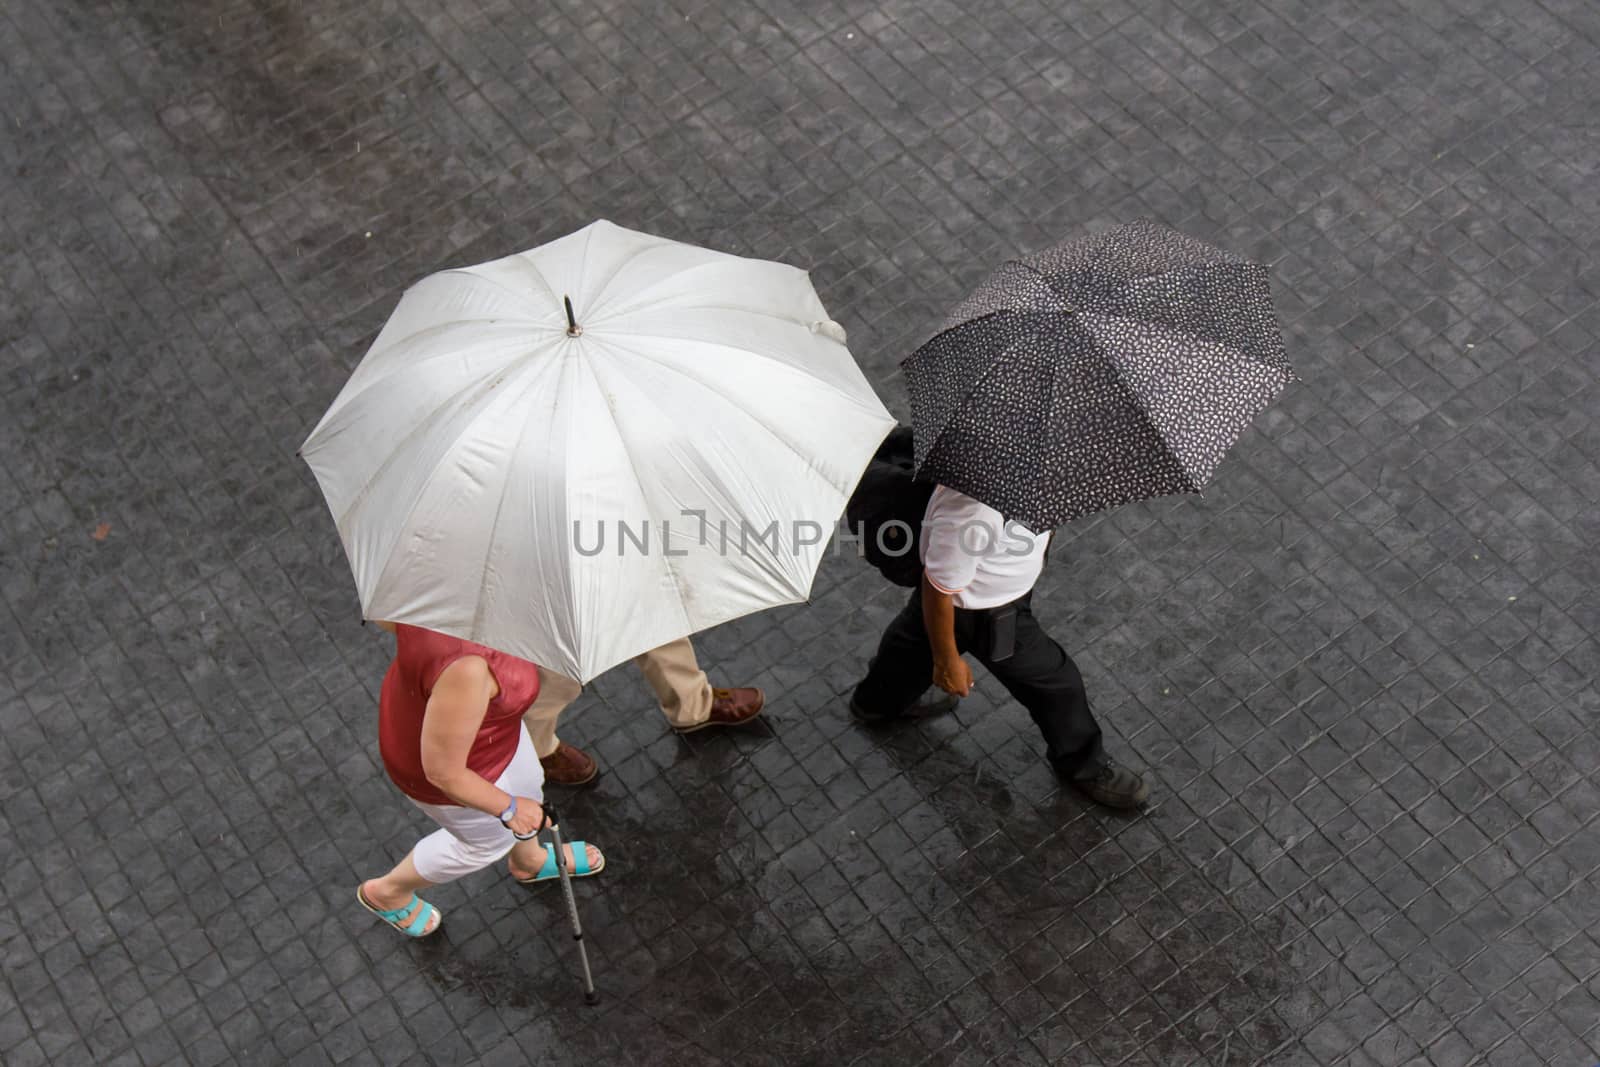 People walking in the rainy day with umbrella